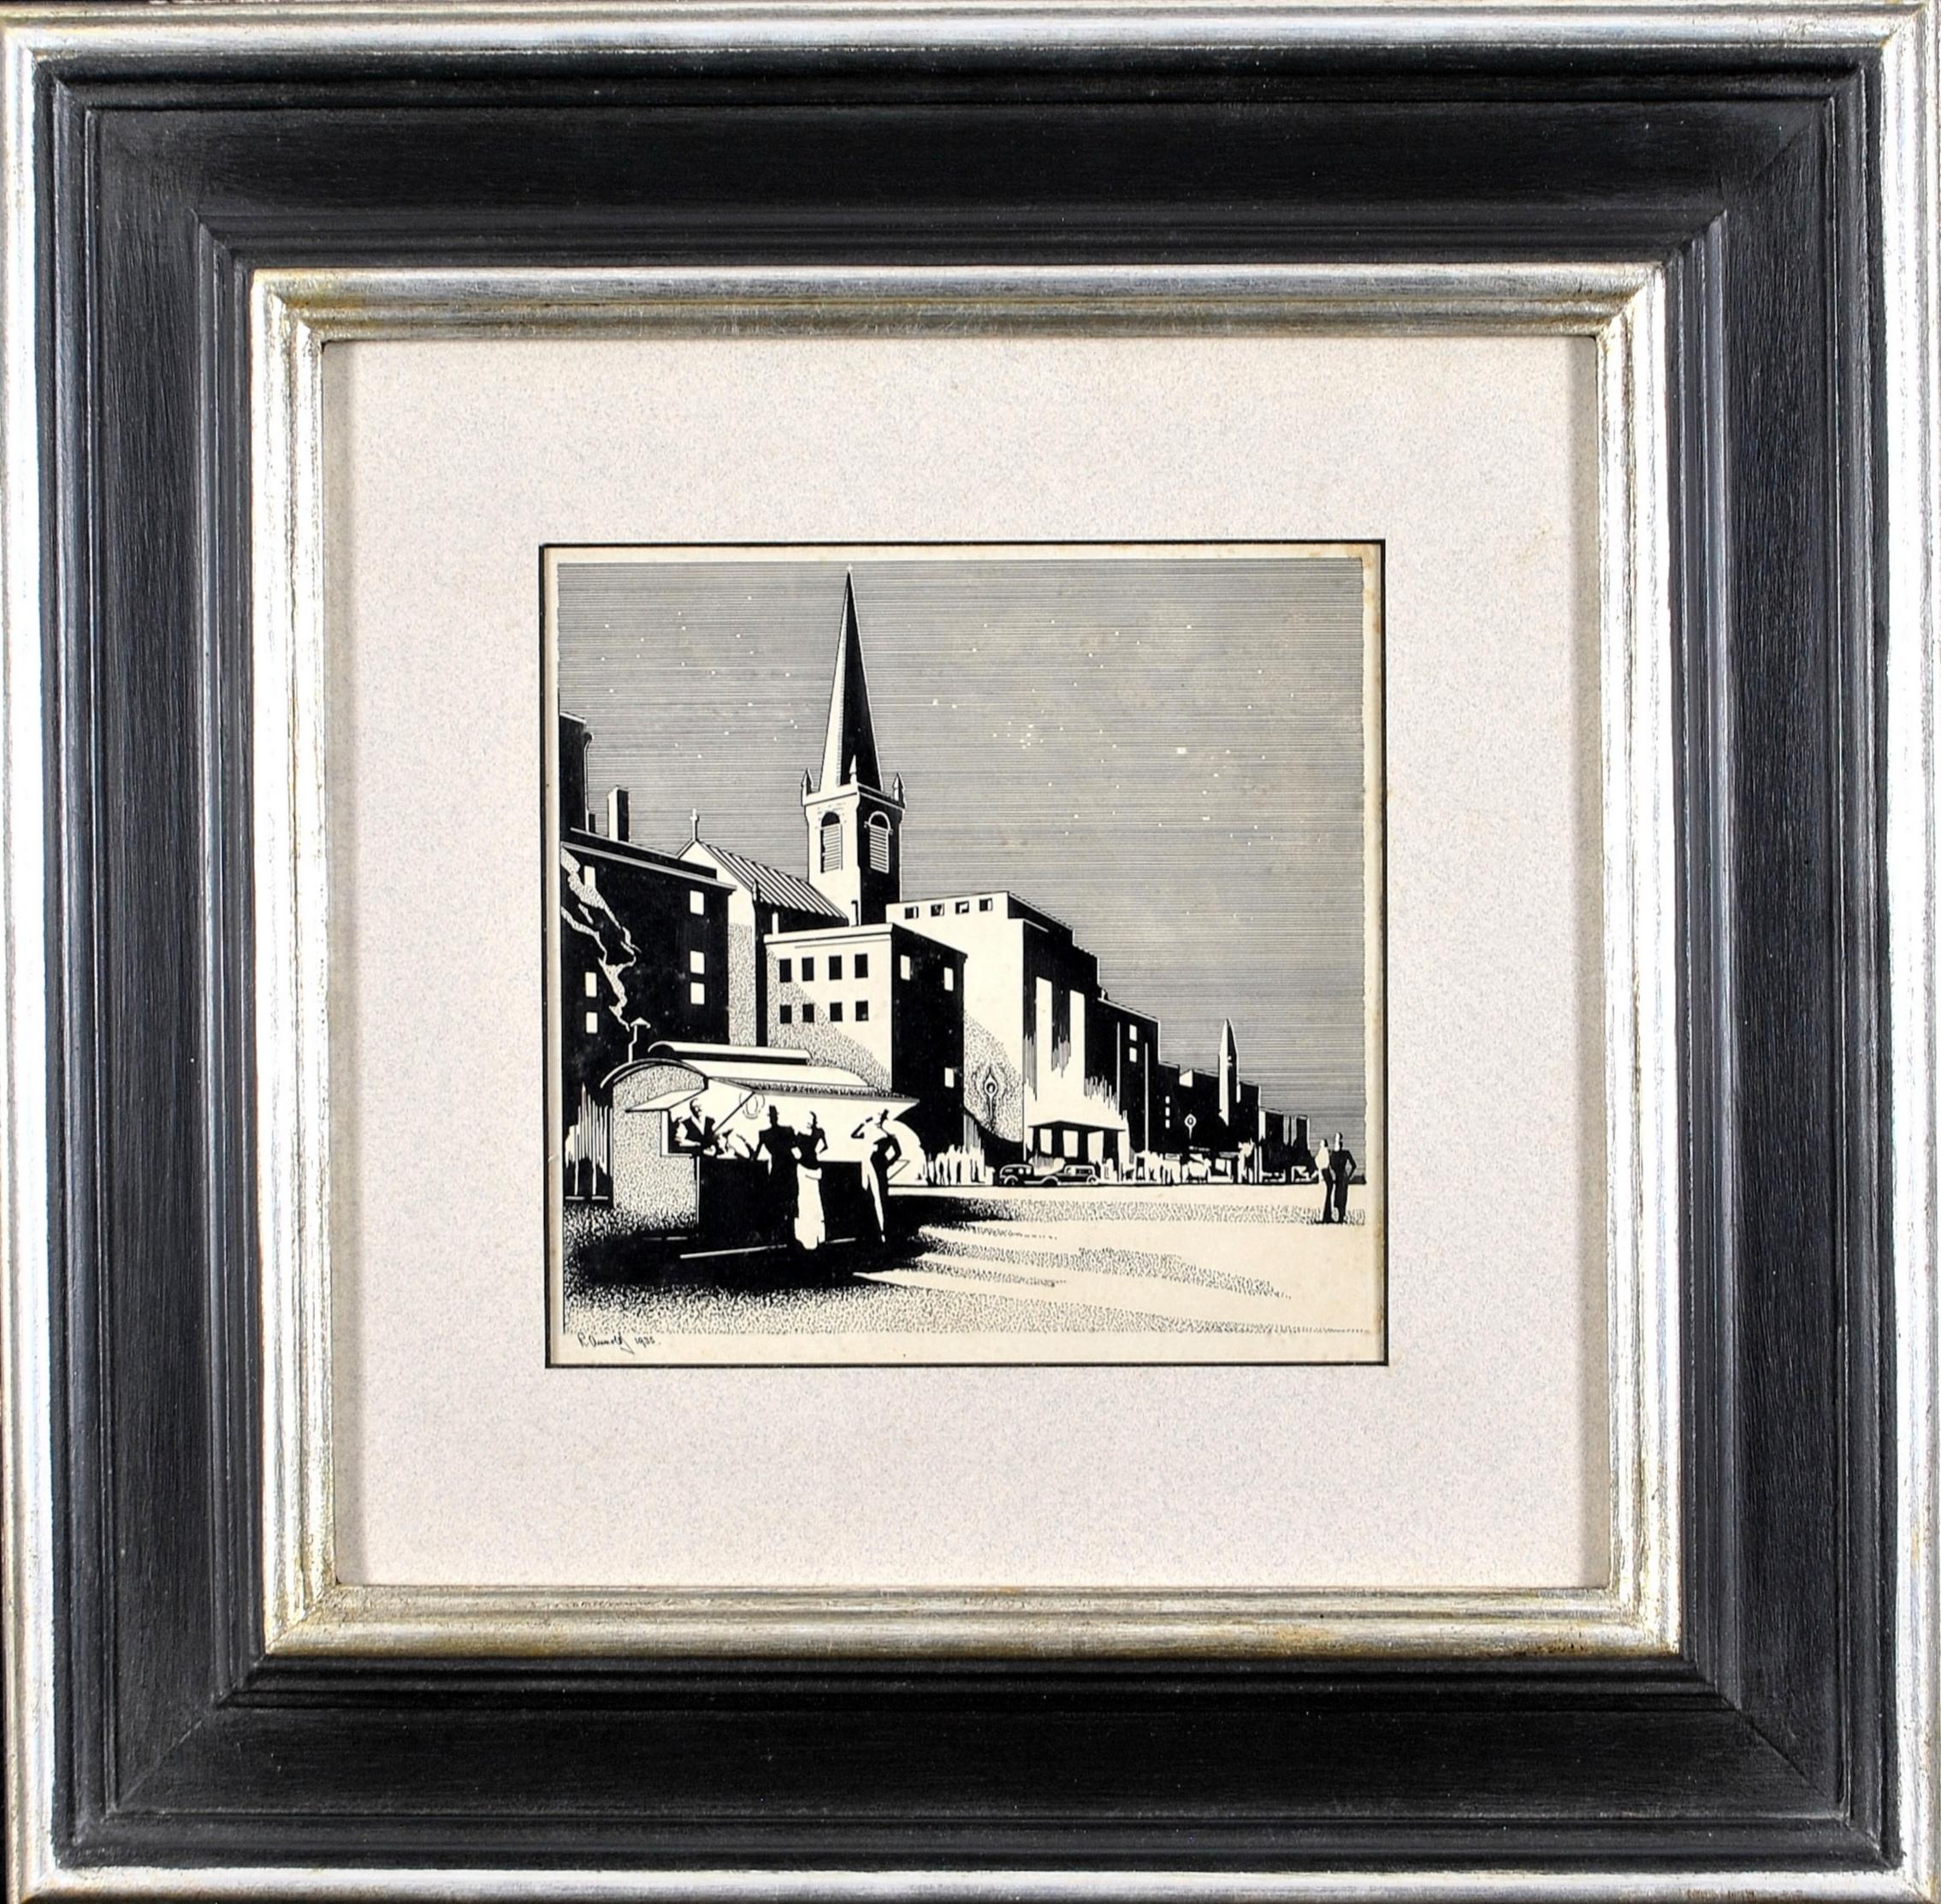 Unknown Landscape Print - Townscape - Figures in an Art Deco Town Early 20th Century Woodcut Print Picture